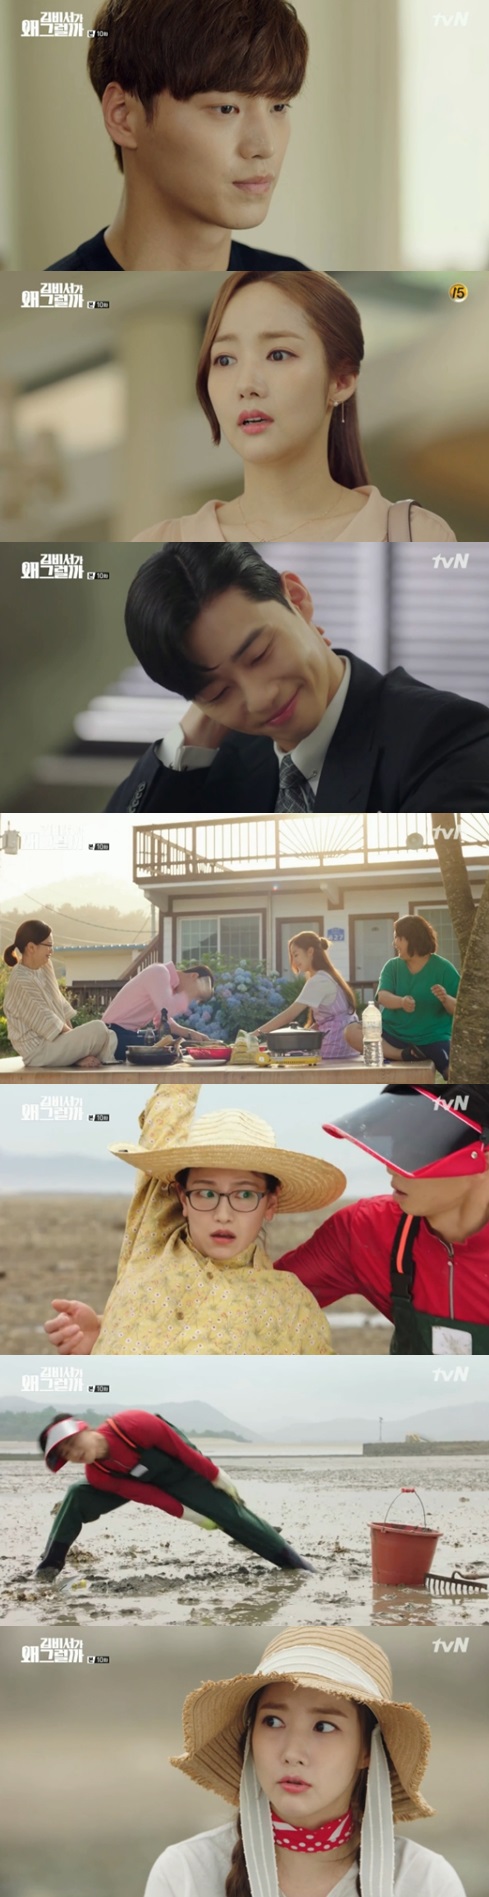 Why is Kim doing it? Actor Park Seo-joon, Park Min-young and Lee Tae-hwan are closer to the truth.In the 10th episode of the cable channel tvN tree drama Why is Secretary Kim doing that (playplayed by Baek Sun-woo, directed by Park Joon-hwa), which was broadcast on the 5th night, Lee Sung-yeon (Lee Tae-hwan), who learned the truth of the day of kidnap 24 years ago, was portrayed.On this day, Kim Mi-so called Lee Yeongjun Sung Hyun brother to Lee Yeongjun, who was sleeping, suspicious of Lee Yeongjun as his brother.Lee Yeongjun replied why but denied he was his brother, saying he was sleeping; Lee Yeongjun then grappled and said, You dont need to know.I dont want to make you cry again, he told himself.Kim Mi-so did not bow, but went to Lee Yeongjuns mother, Choi (Kim Hye-ok), and asked, but Choi also denied and avoided the truth.Lee Sung-yeon, who happened to meet Lee Sung-yeon, asked about the impression of a girl who was a child, but Lee Sung-yeon said, I do not think I can remember.I wonder if it is an unconscious self-defense. However, Kim Mi-so saw the pictures of Lee Sung-yeon and Lee Yeongjun as a child and was convinced that brother and Lee Yeongjun were the same person and decided to pretend not to know himself.Kim Mi-so, who visited the house with Lee Yeongjuns invitation, was ashamed for a while and shed tears when she saw the wound on Lee Yeongjuns ankle.At this time, when my sisters continued to judge Lee Yeongjun as a selfish person, Kim Mi-so cried, saying, Our vice chairman is not such a person.Lee Yeongjun, who saw this, laughed at the mistake, saying, Is there a lot of opposition to crying? I am so perfect that I am burdened.My sisters seem to be worried about us a lot, but I will make all of them disappear soon, he said.The two continued their love affair: Kim Mi-so flicked his finger heart, while Lee Yeongjun pretended to pick it up to the moon in the sky.He also played an Actor on how to look good to his family from Park Yoo-sik (Kang Ki-young).Lee Yeongjun went to Jebudos guest house where Gearko Kim Mi-so spends time with her sisters every year.And Lee Yeongjun announced that he was dating Kim Mi-so and told him not to worry, but his older sister drew a line saying it was uncomfortable.Lee Yeongjun challenged Lee Yeongjun to the Infinite Refill soy sauce that he had not eaten normally, but his big sister continued to stimulate Lee Yeongjun.Lee Yeongjun said, There are more people who do it, I will pick up the main event and go in. Then I ate constantly and eventually pretended.Kim Mi-so went on to point to her sisters rudeness for cursing Lee Yeongjun and suggested a clam-capping showdown to say her wish to do not hate the vice president.After Lee Yeongjuns struggle, the smile team won and Lee Yeongjun said, Please watch all the time. The sisters also opened their hearts to Lee Yeongjun.The sisters explained why the Smiley family came to Jebudo every year and spent time.As a child, my father (Lee Min-ki) and my mother (Jung So-min) and the family who were playing at sea vowed to go to the sea every year for my mothers birthday and to keep my promise.Smile had released her childhood memories to her mother, who had a sudden bad health and had a lively smile and a lively time until the end, despite her sick body.If you have a pain that is hard to say, I would like you to tell me someday. I will be next to you forever, he said.And Choi told Lee Sung-yeon, You are not the one who was kidnapped. 24 years ago, he told all the truth of the day of the kidnap incident.However, Lee Sung-yeon denied this fact and headed to the event where Lee Yeongjun is proceeding.And I cried to Kim Mi-so, Do you think my memory is wrong?Among them, Kim Mi-so saw a woman in the event hall and recalled and fainted a woman in the Kidnap case 24 years ago.